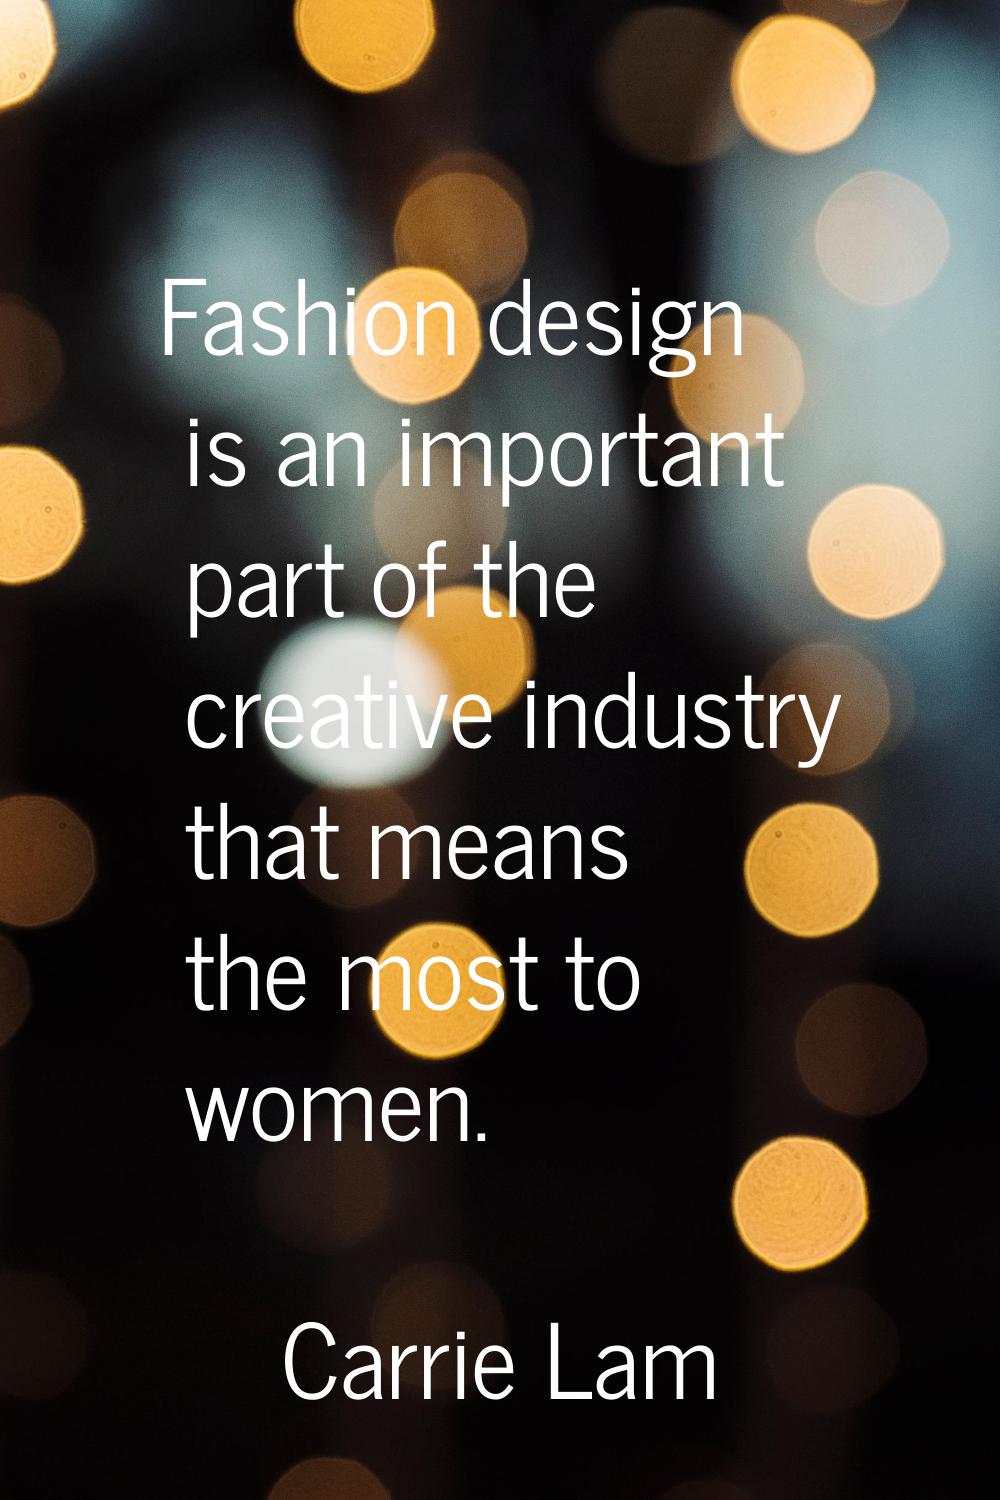 Fashion design is an important part of the creative industry that means the most to women.